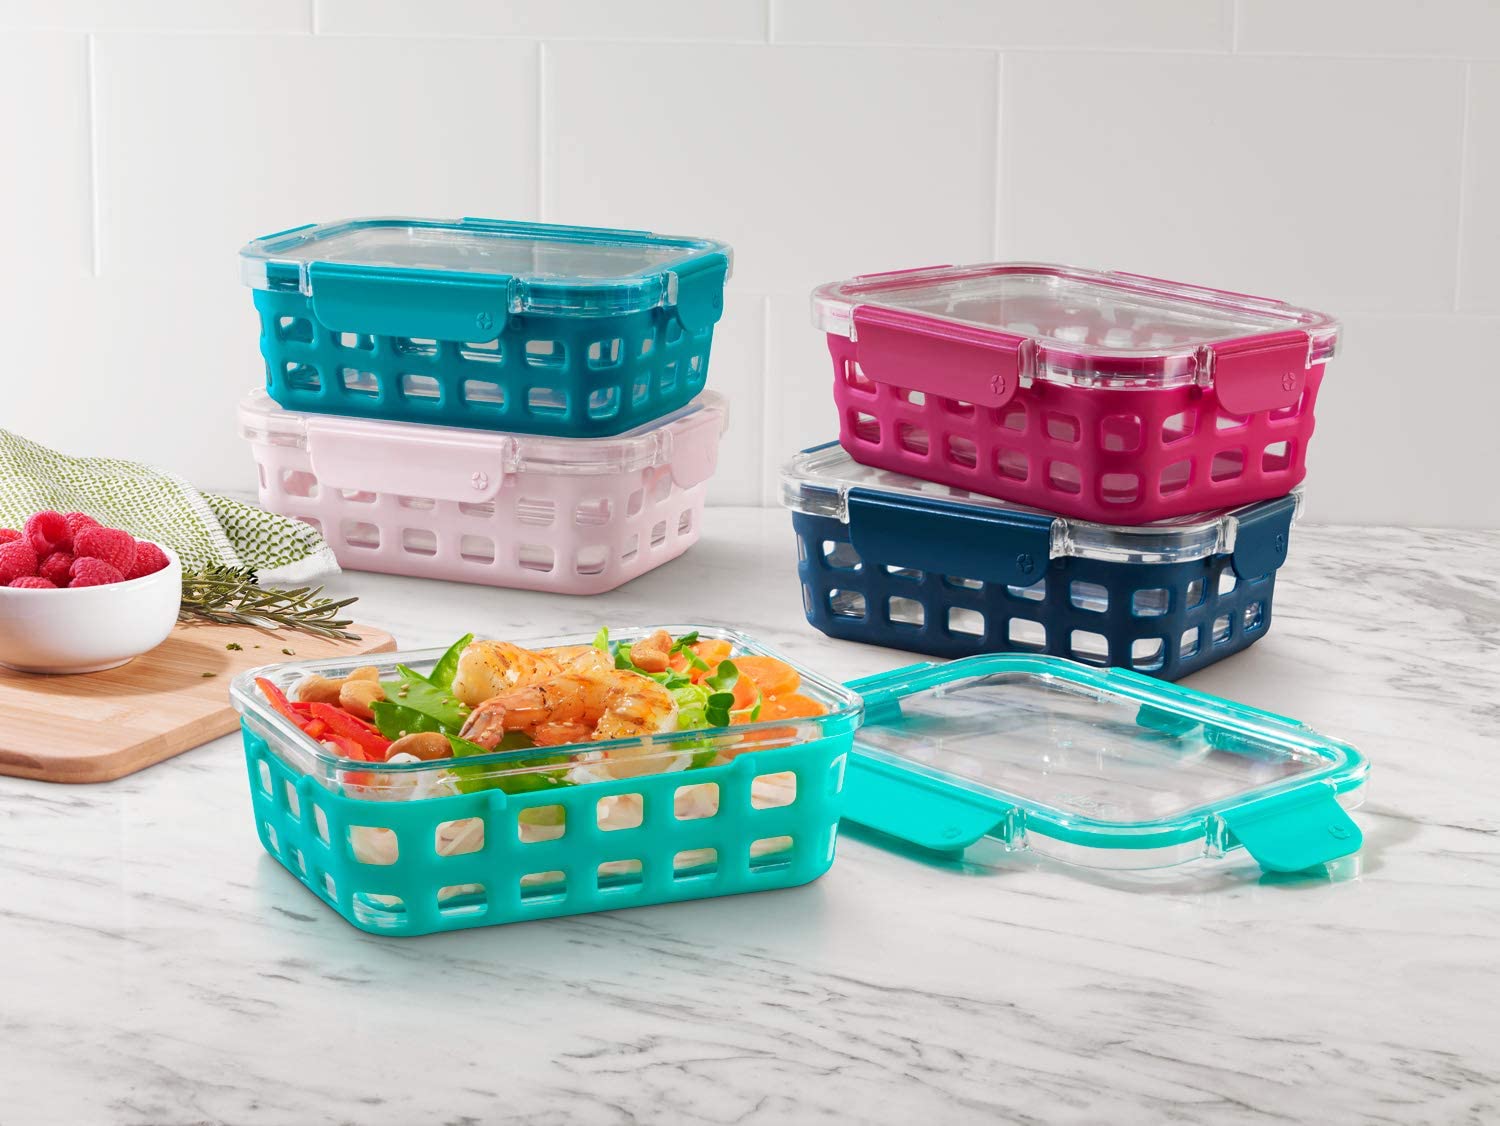 PrepSealer 5-Pc PrepCube Food Storage Containers w/ Silicone Lids on QVC 